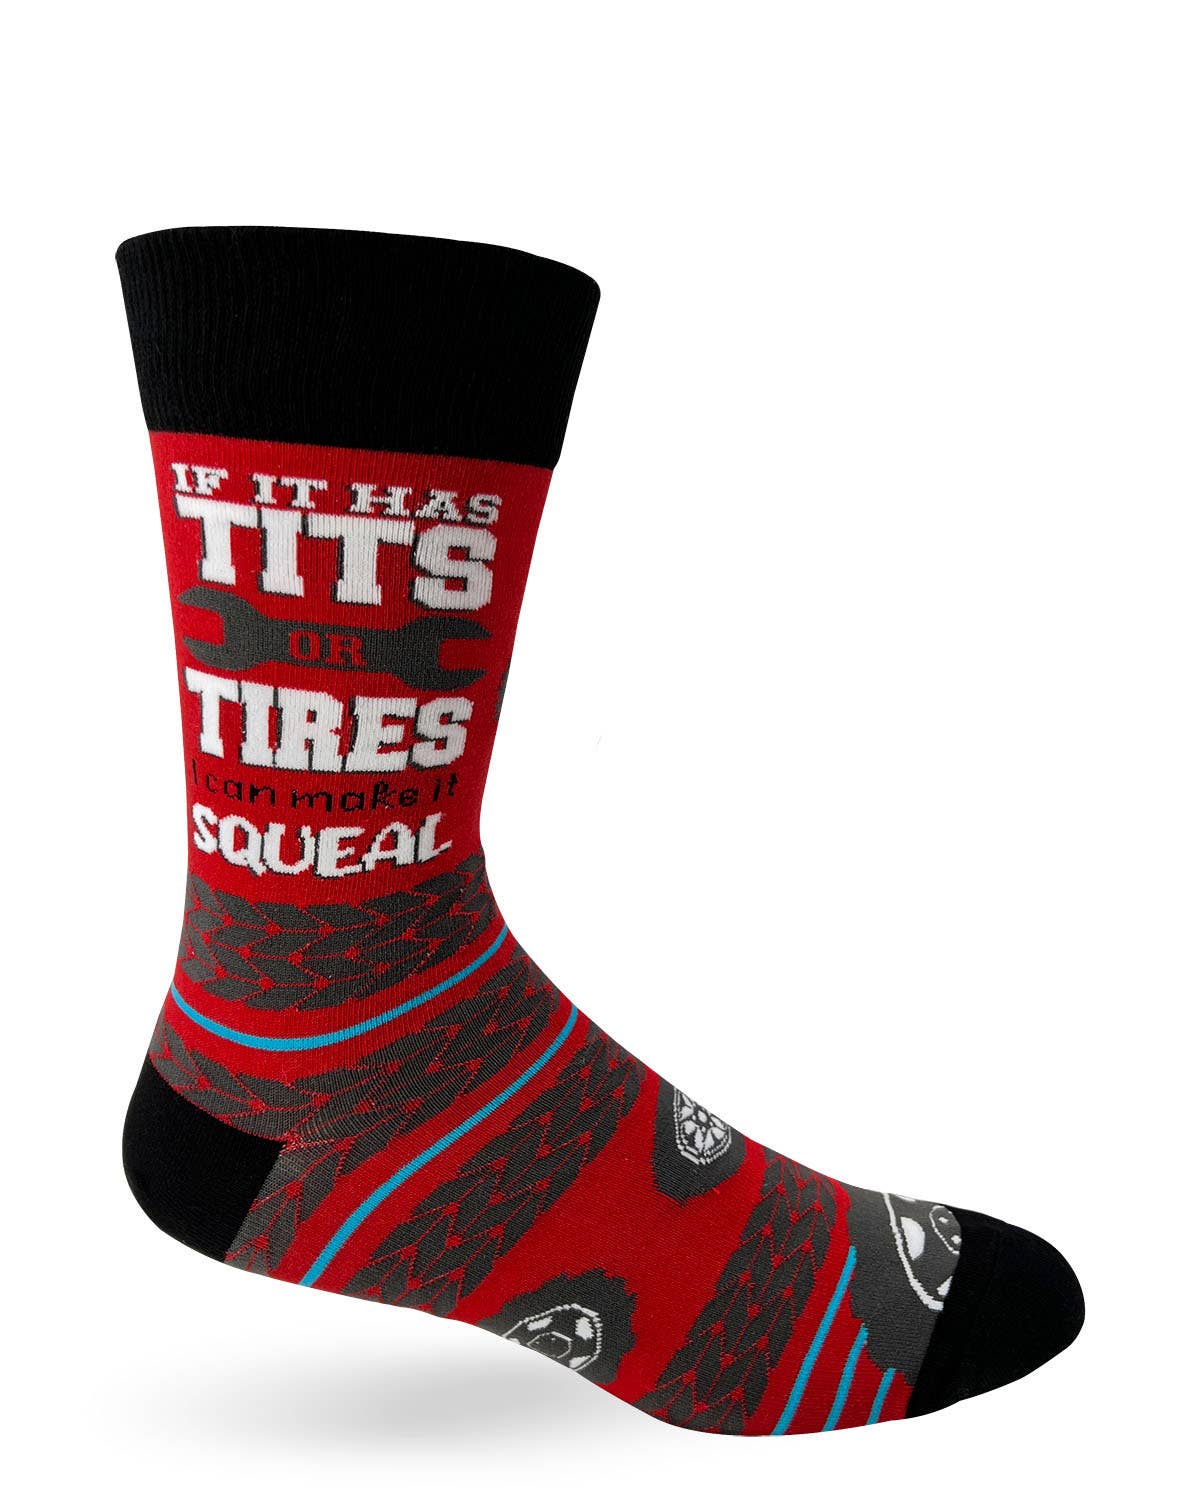 If It Has Tits Or Tires I Can Make It Squeal Men's Socks